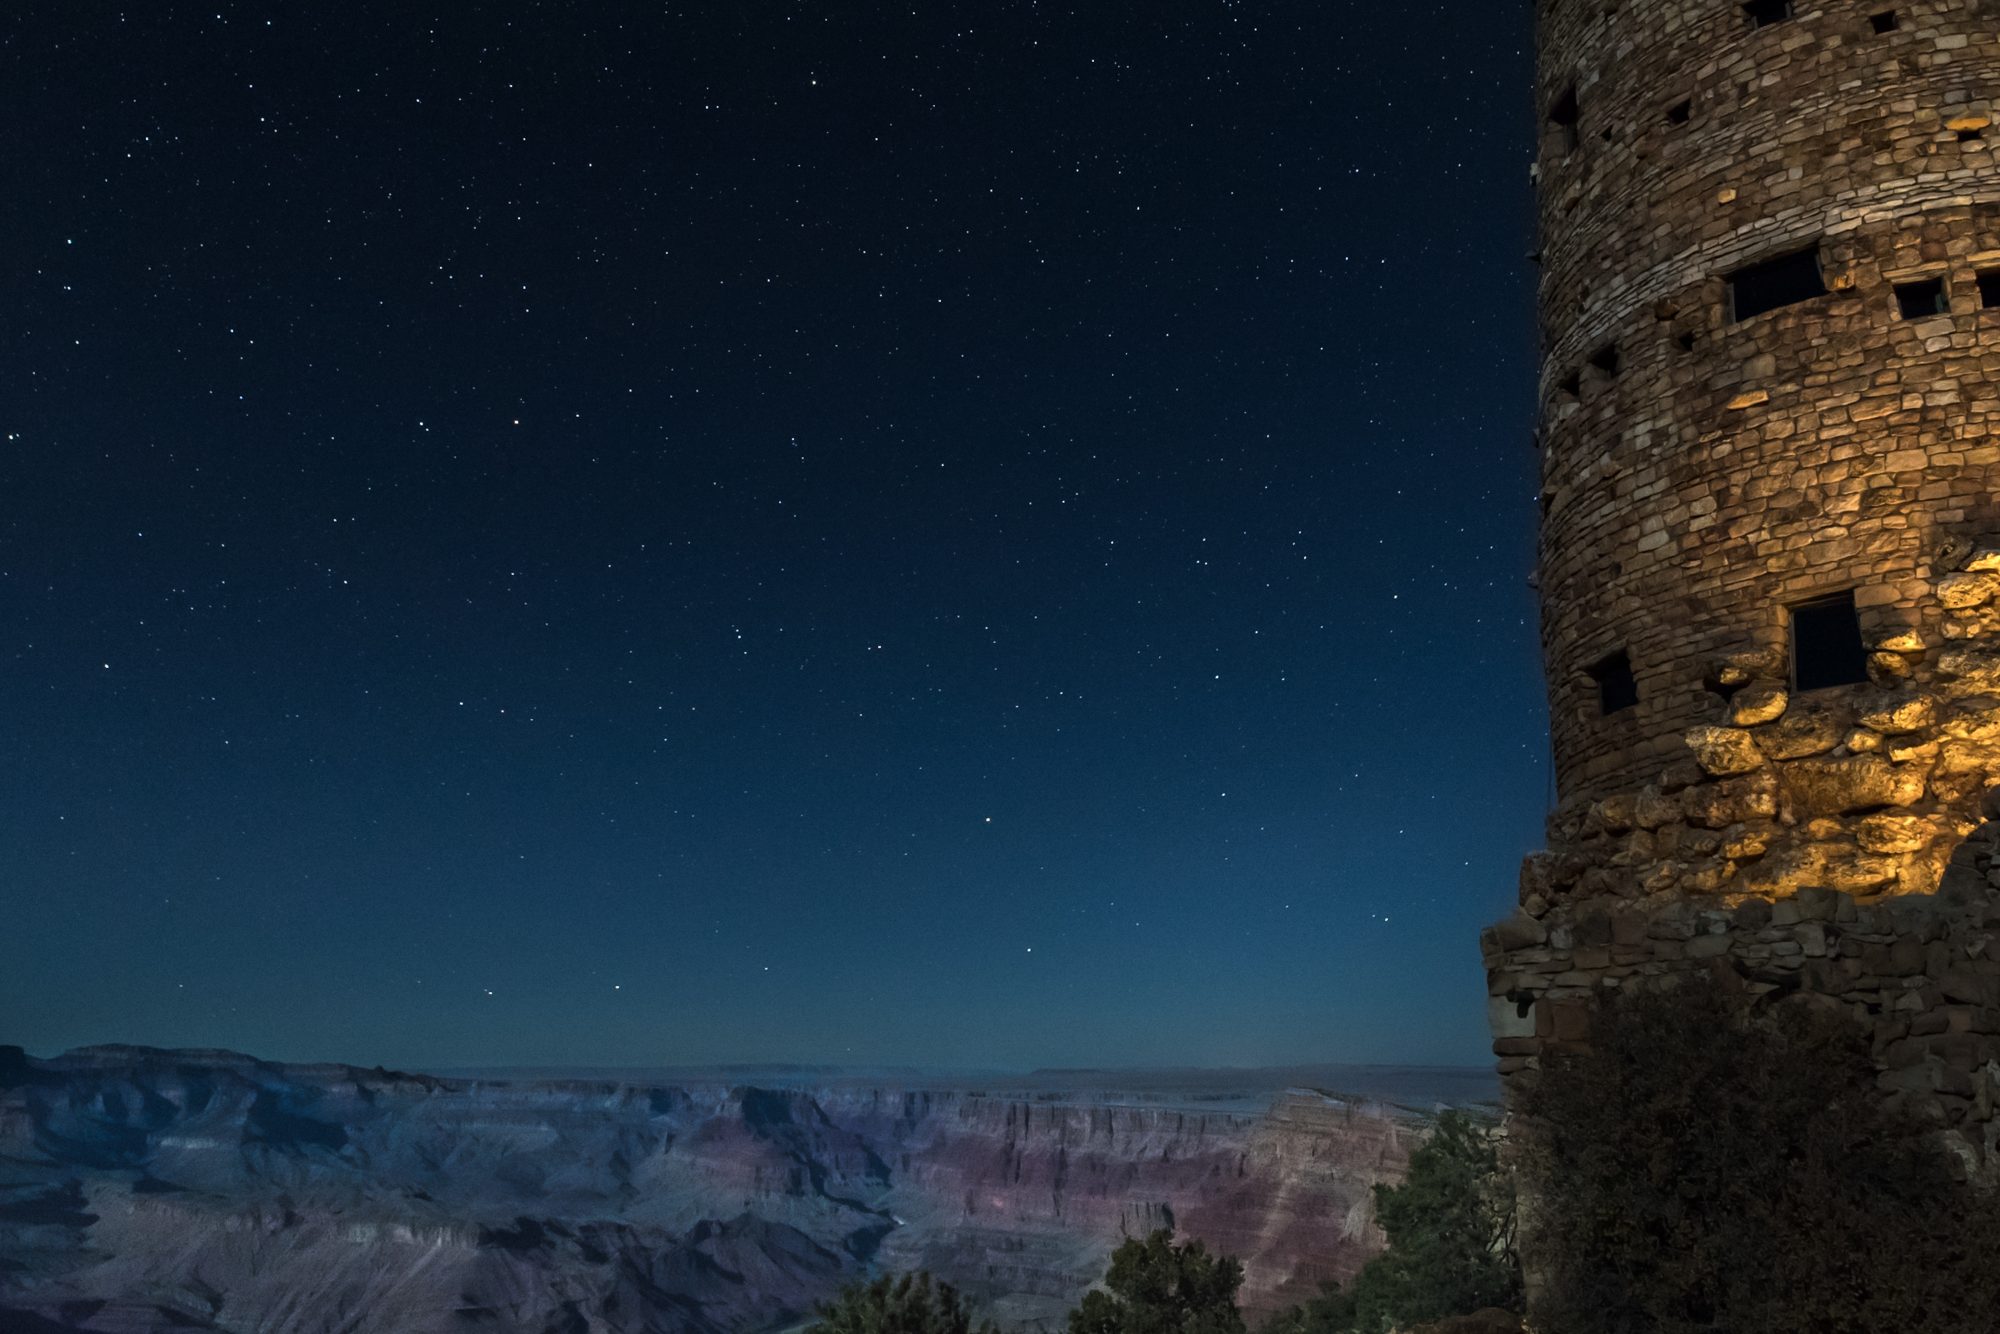 Grand Canyon Watch Tower in the middle of the night with more stars in the night sky than FAQs to be answered